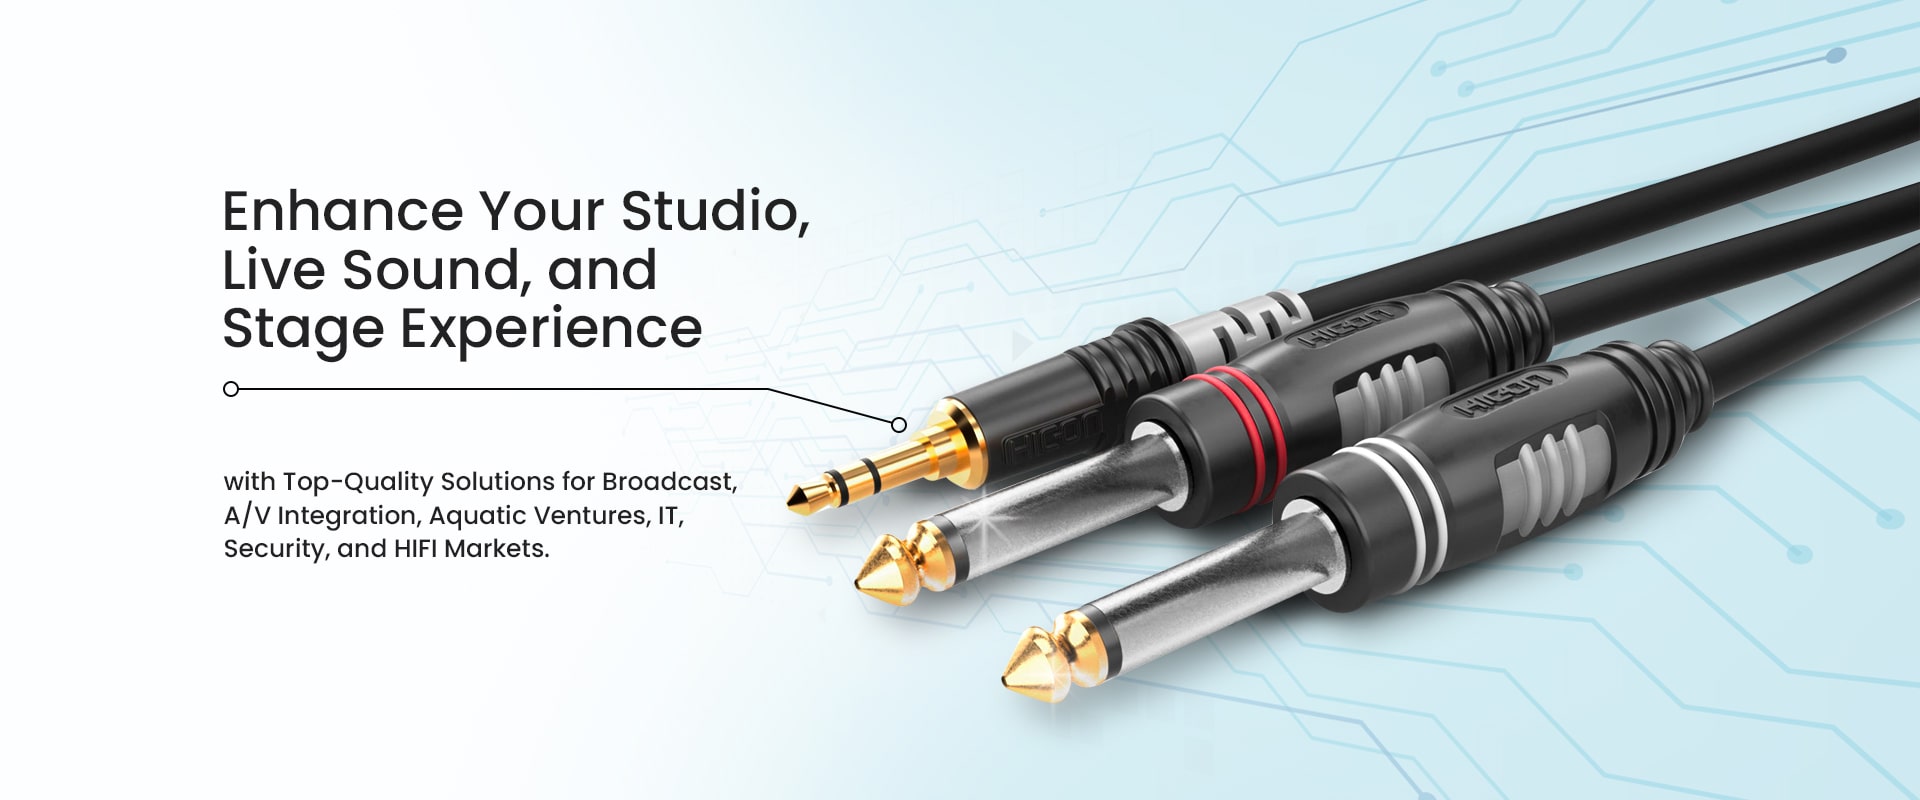 High-end Pro Audio, Video, Broadcast, Integration, Securities, Network and Marine cable brand for its perfect quality, durability and stability. 